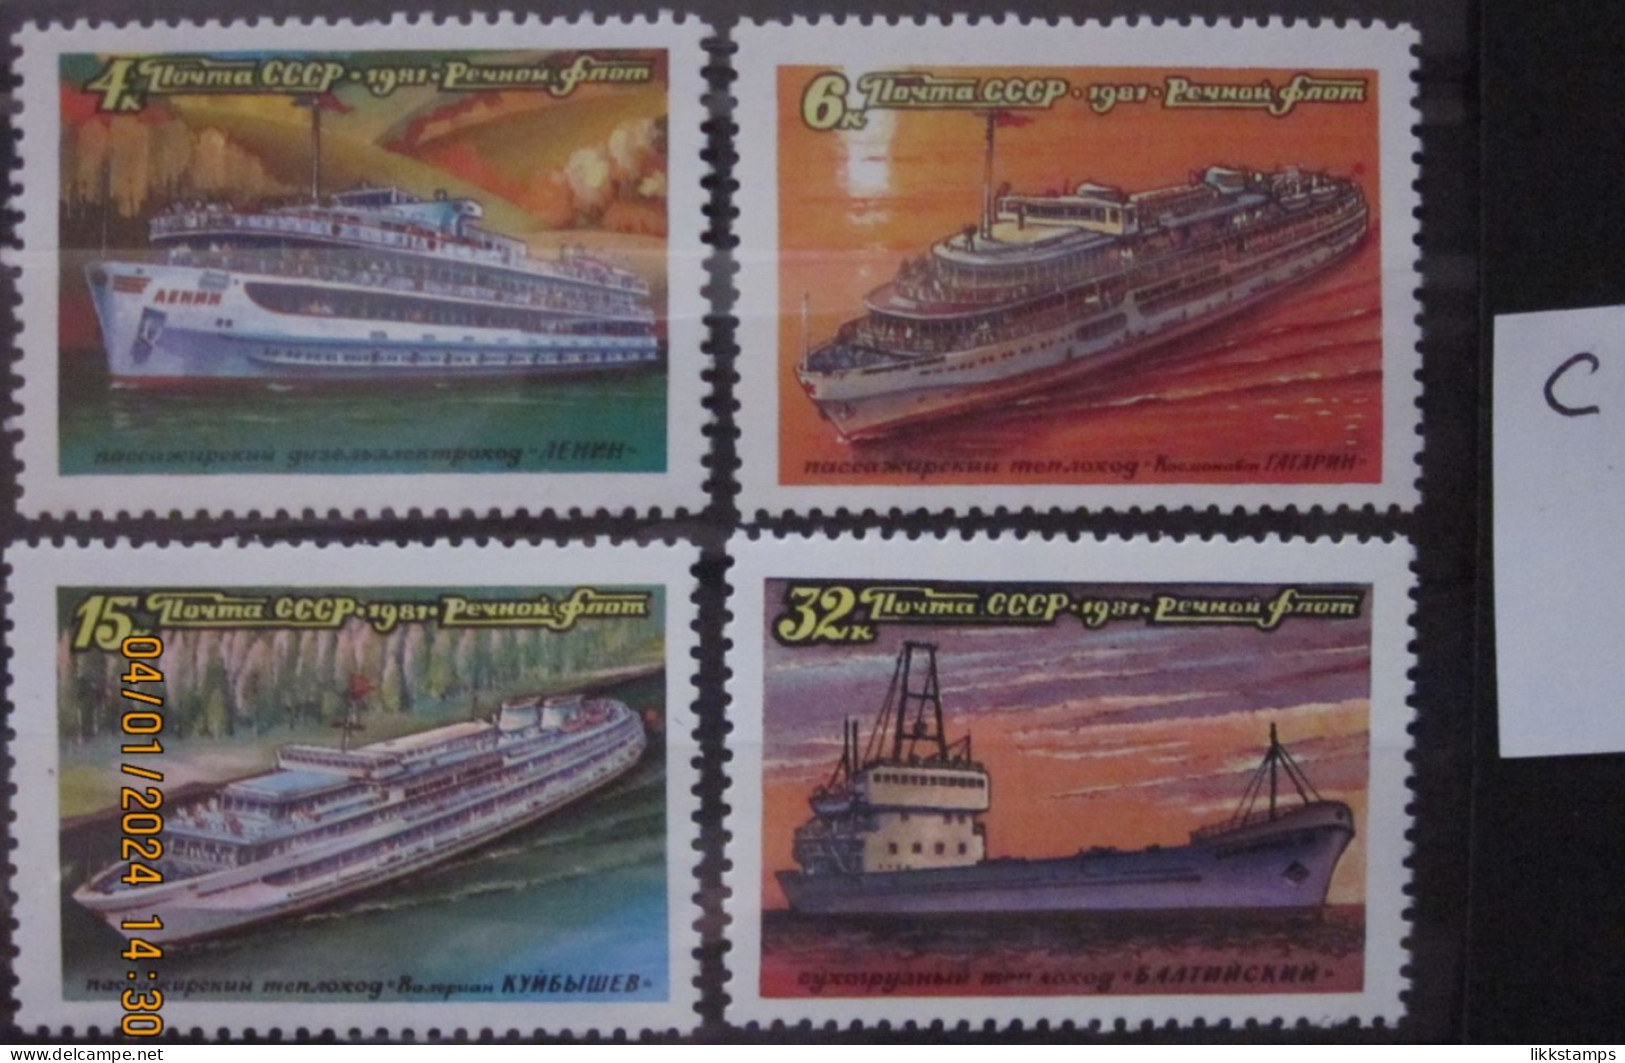 RUSSIA ~ 1981 ~ S.G. NUMBERS 5143 - 5146, ~ 'LOT C' ~ RIVER SHIPS. ~ MNH #03621 - Nuovi